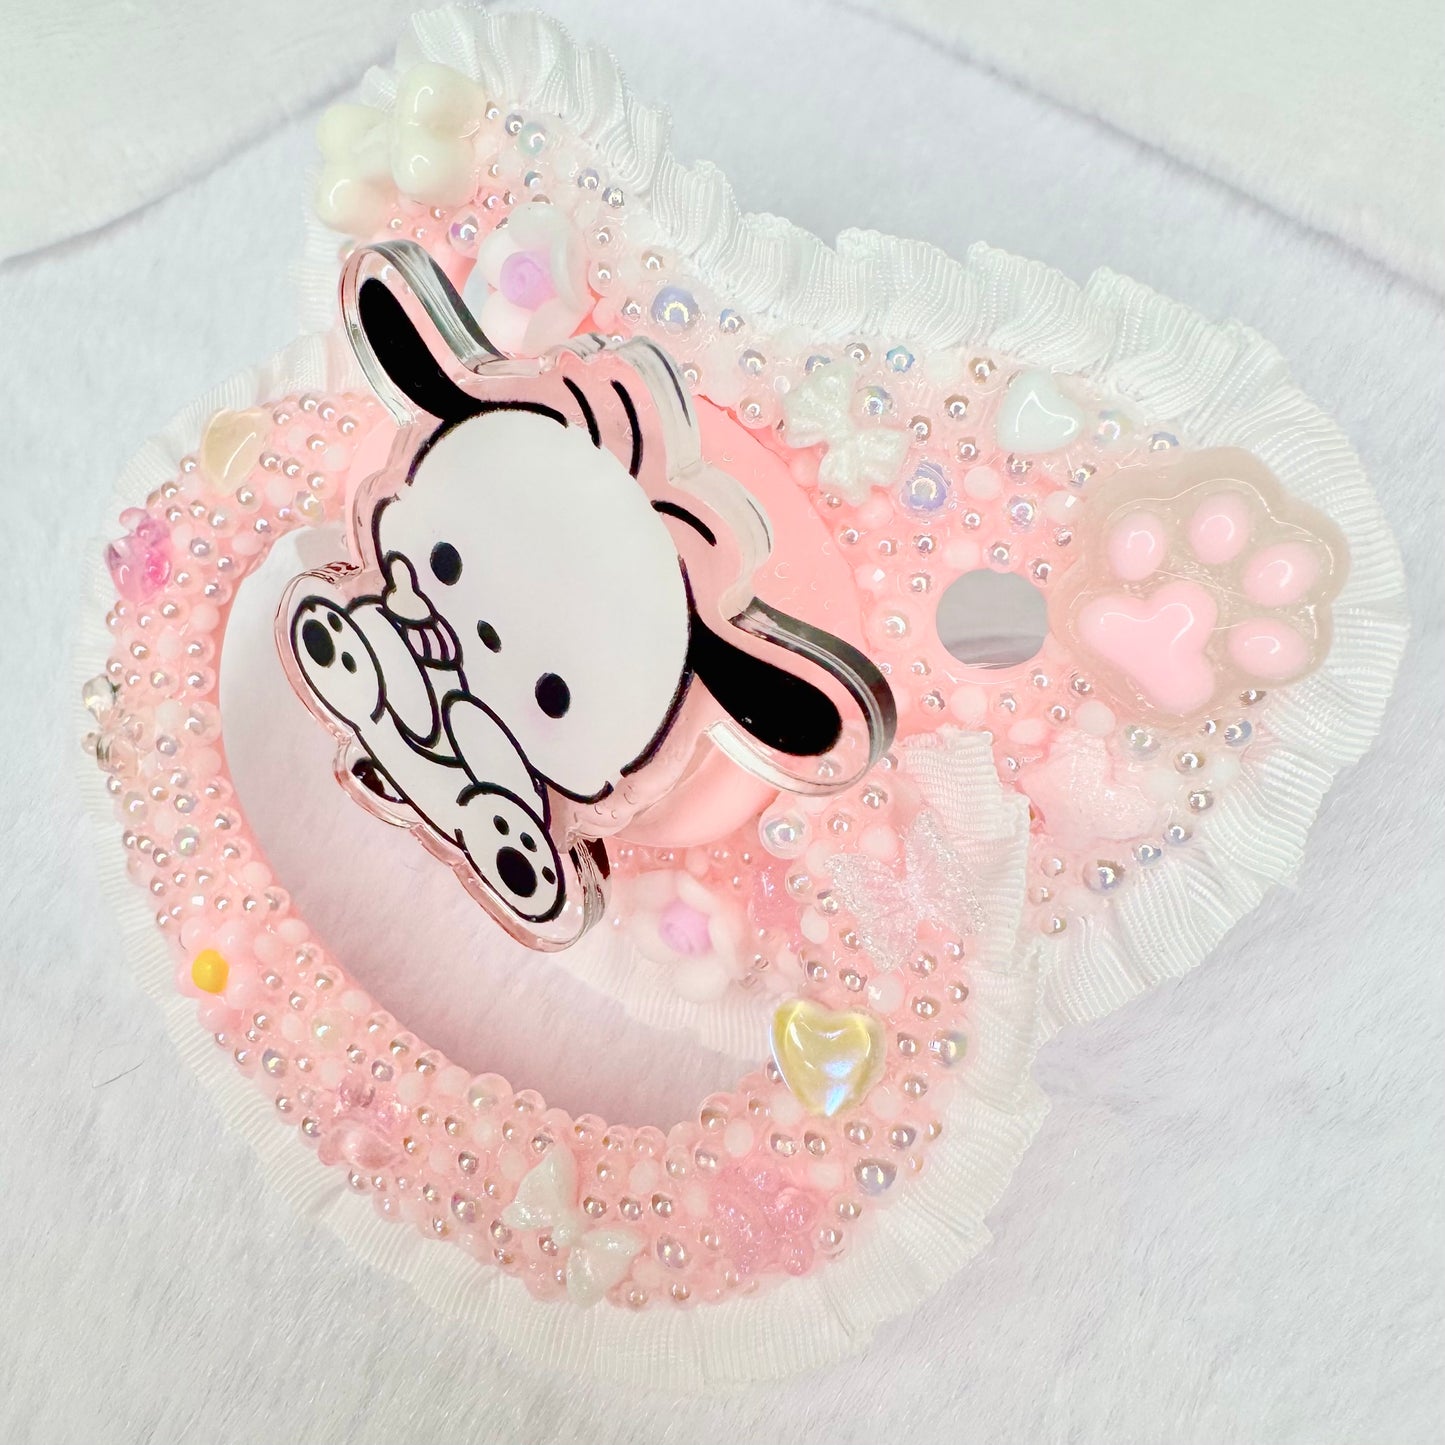 Baby Pochacco - Adult pacifier